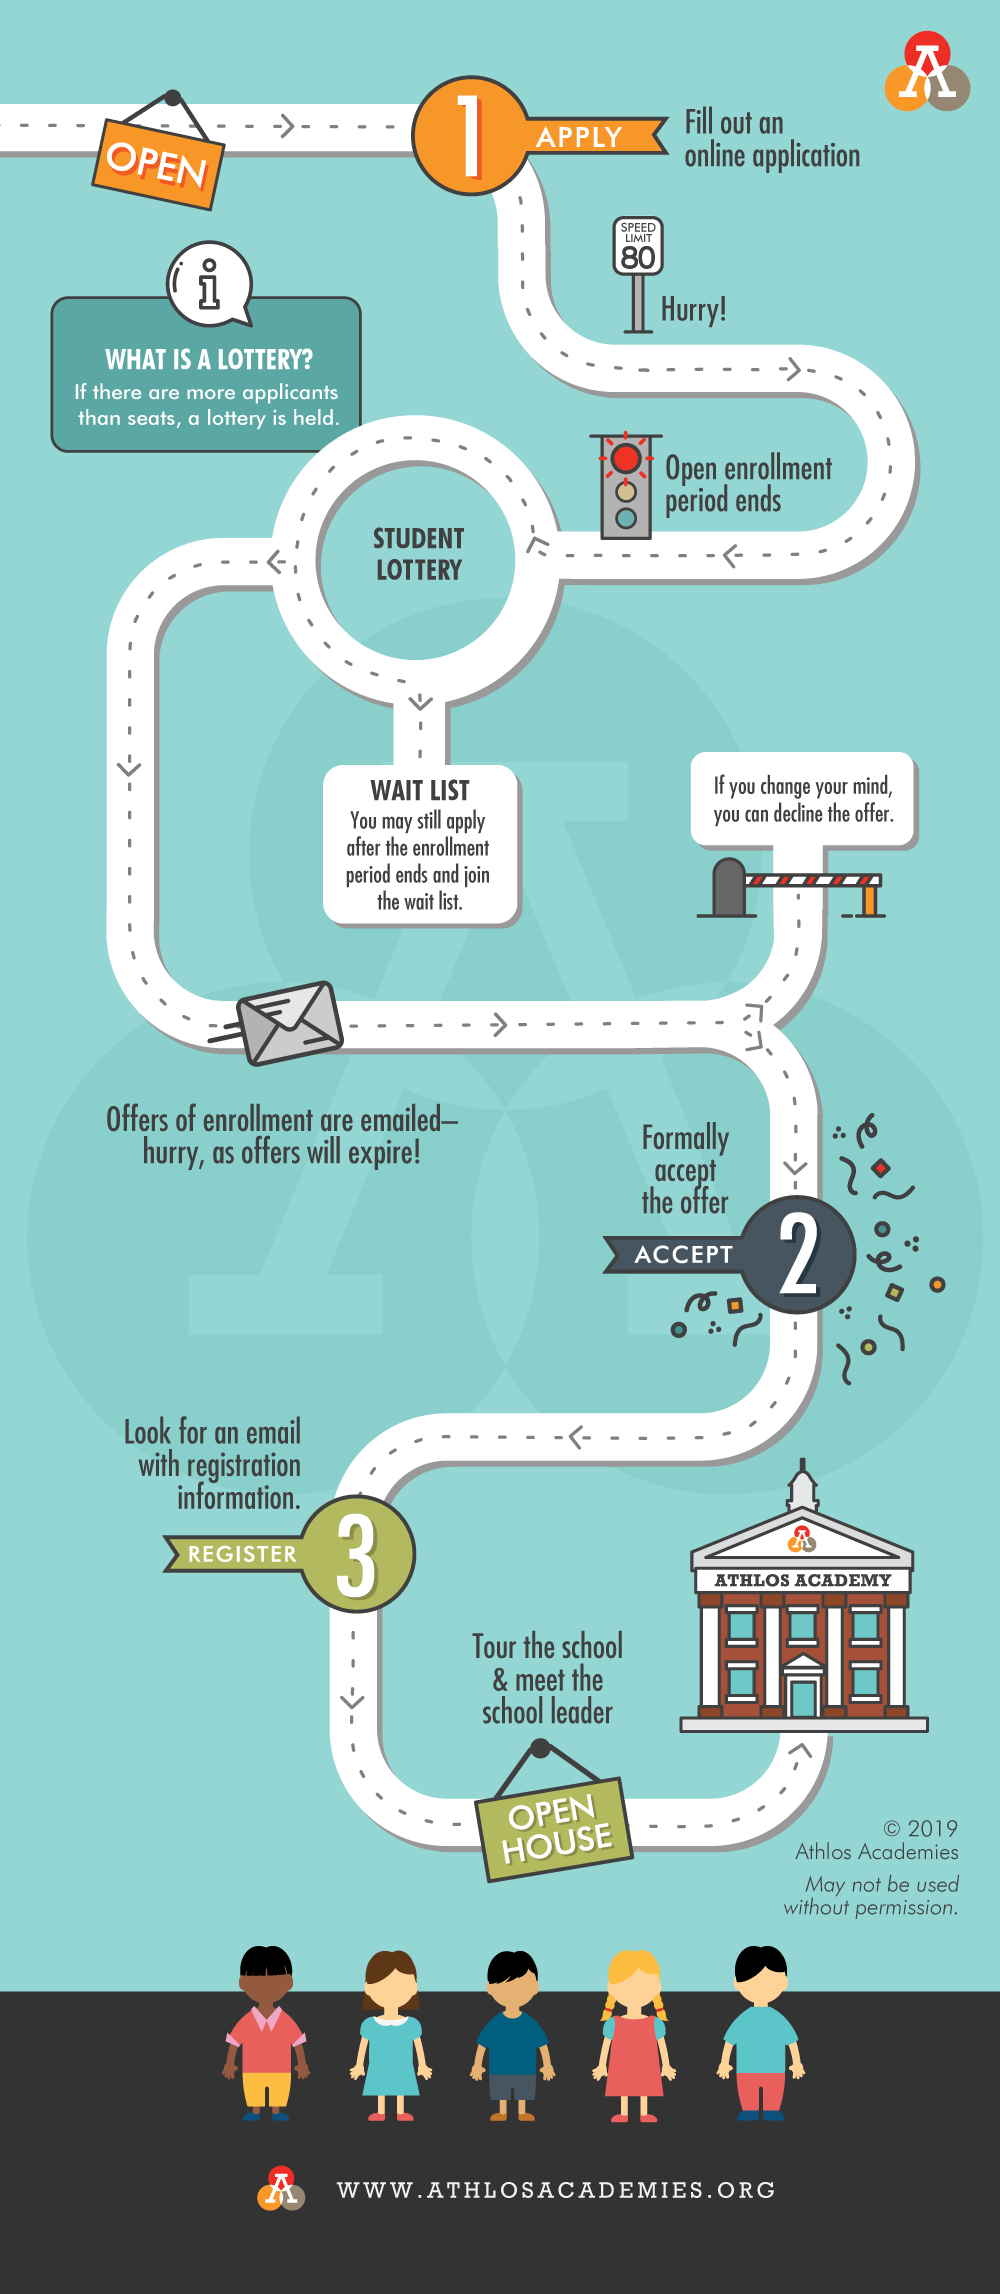 Athlos Academy - Road to Registration infographic